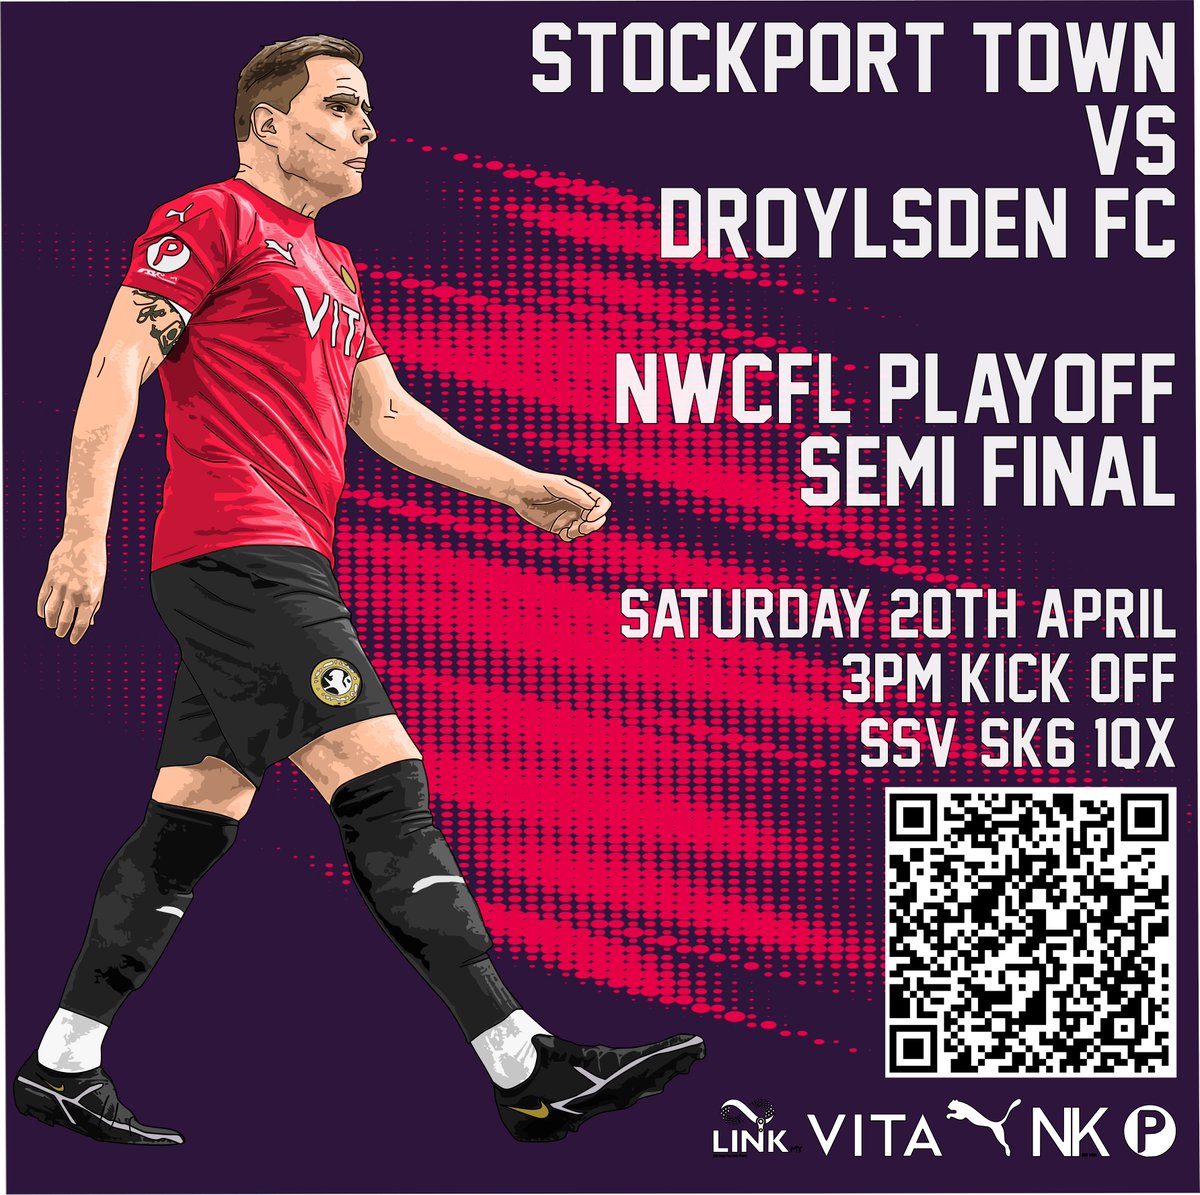 Tickets for our NWCFL 1st Division South Play Off Semi Final against Droylsden are selling quickly. Please remember this is an 𝗔𝗟𝗟 𝗧𝗜𝗖𝗞𝗘𝗧 fixture. Tickets are available to purchase until 7pm on Friday 19th April. 💻 ticketsource.co.uk/stockporttownf… 📞 0333 666 3366